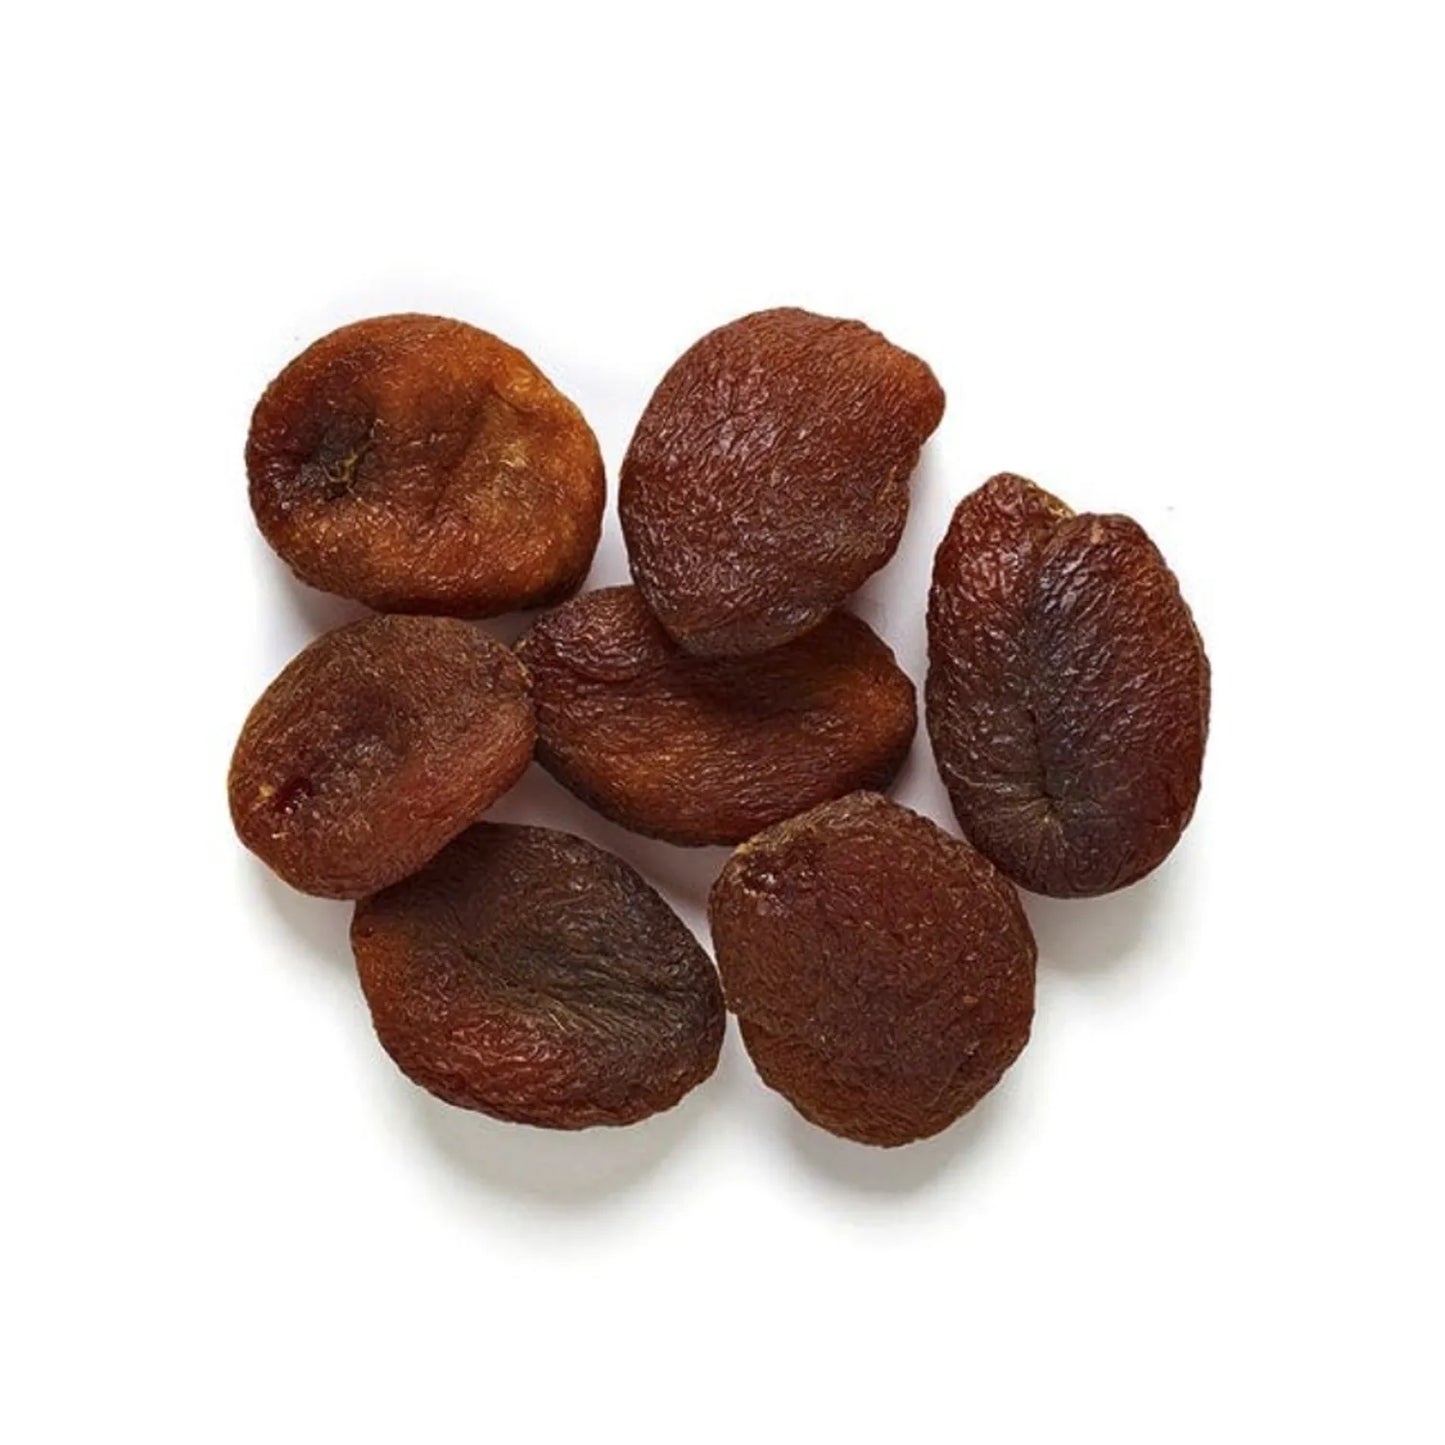 Delicious and nutritious organic sun-dried apricots packed with natural flavor and goodness.